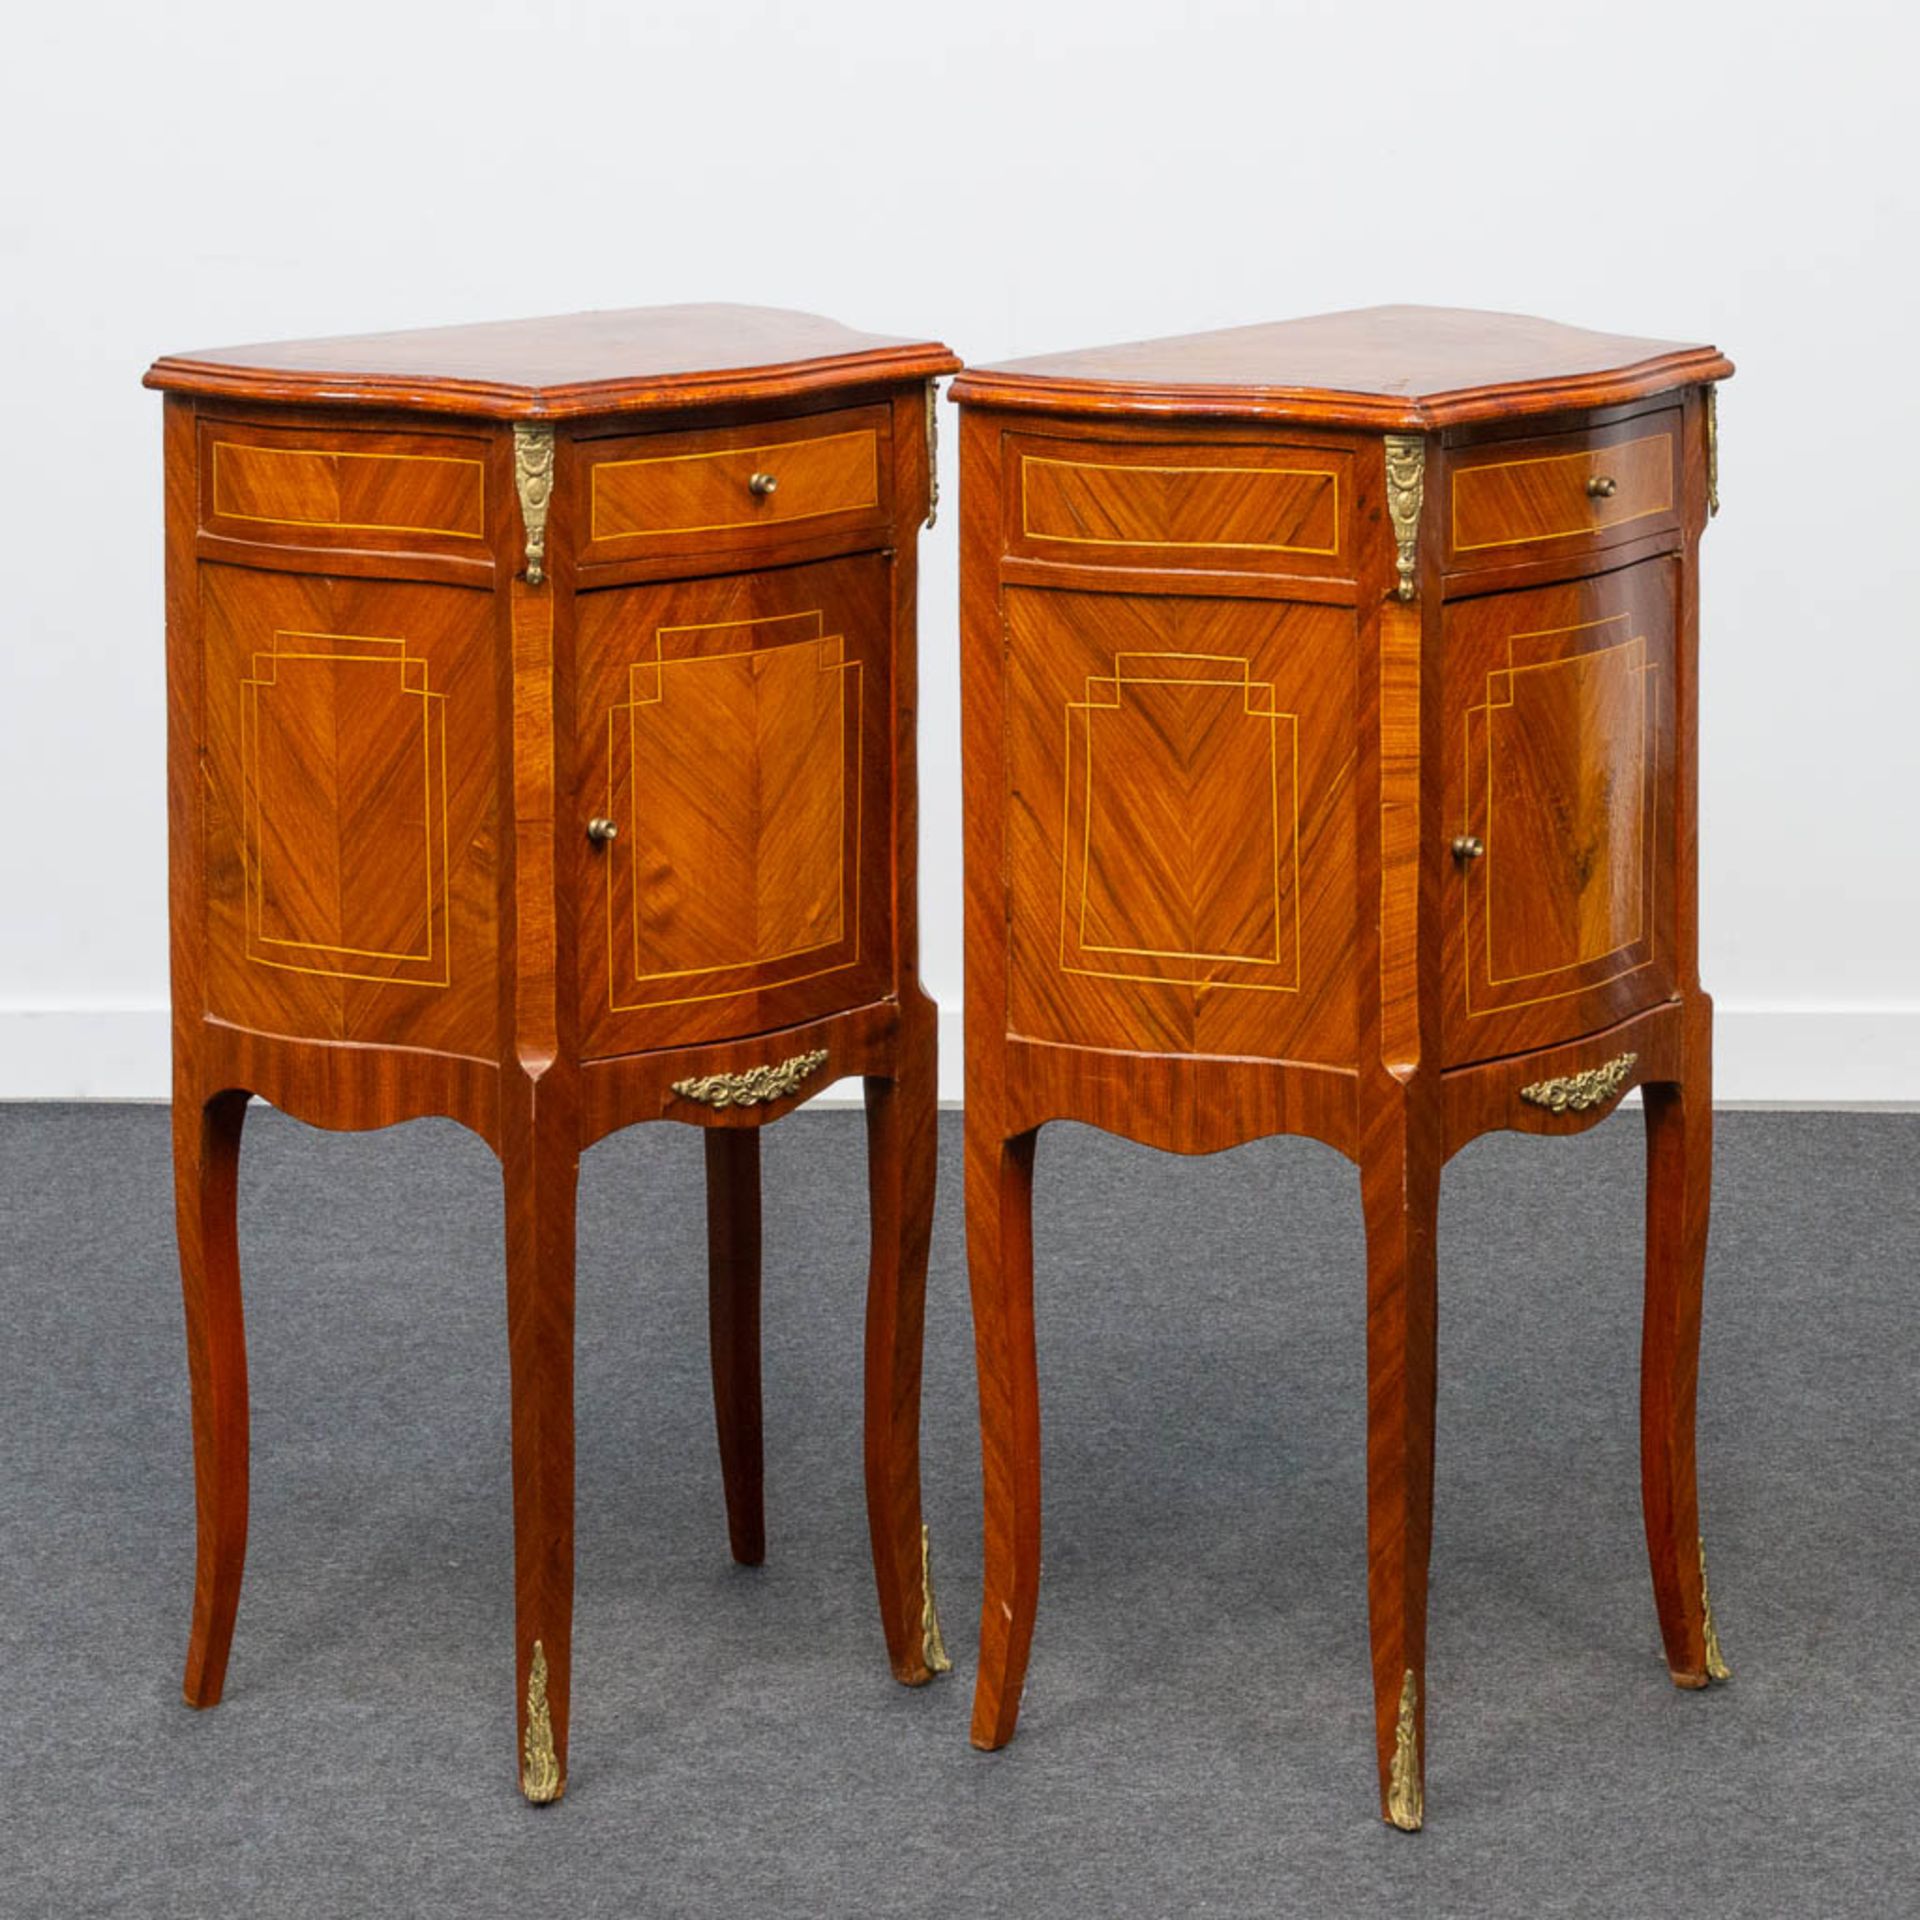 A pair of bronze mounted nightstands, inlaid with marquetry. Second half of the 20th century. - Image 15 of 22